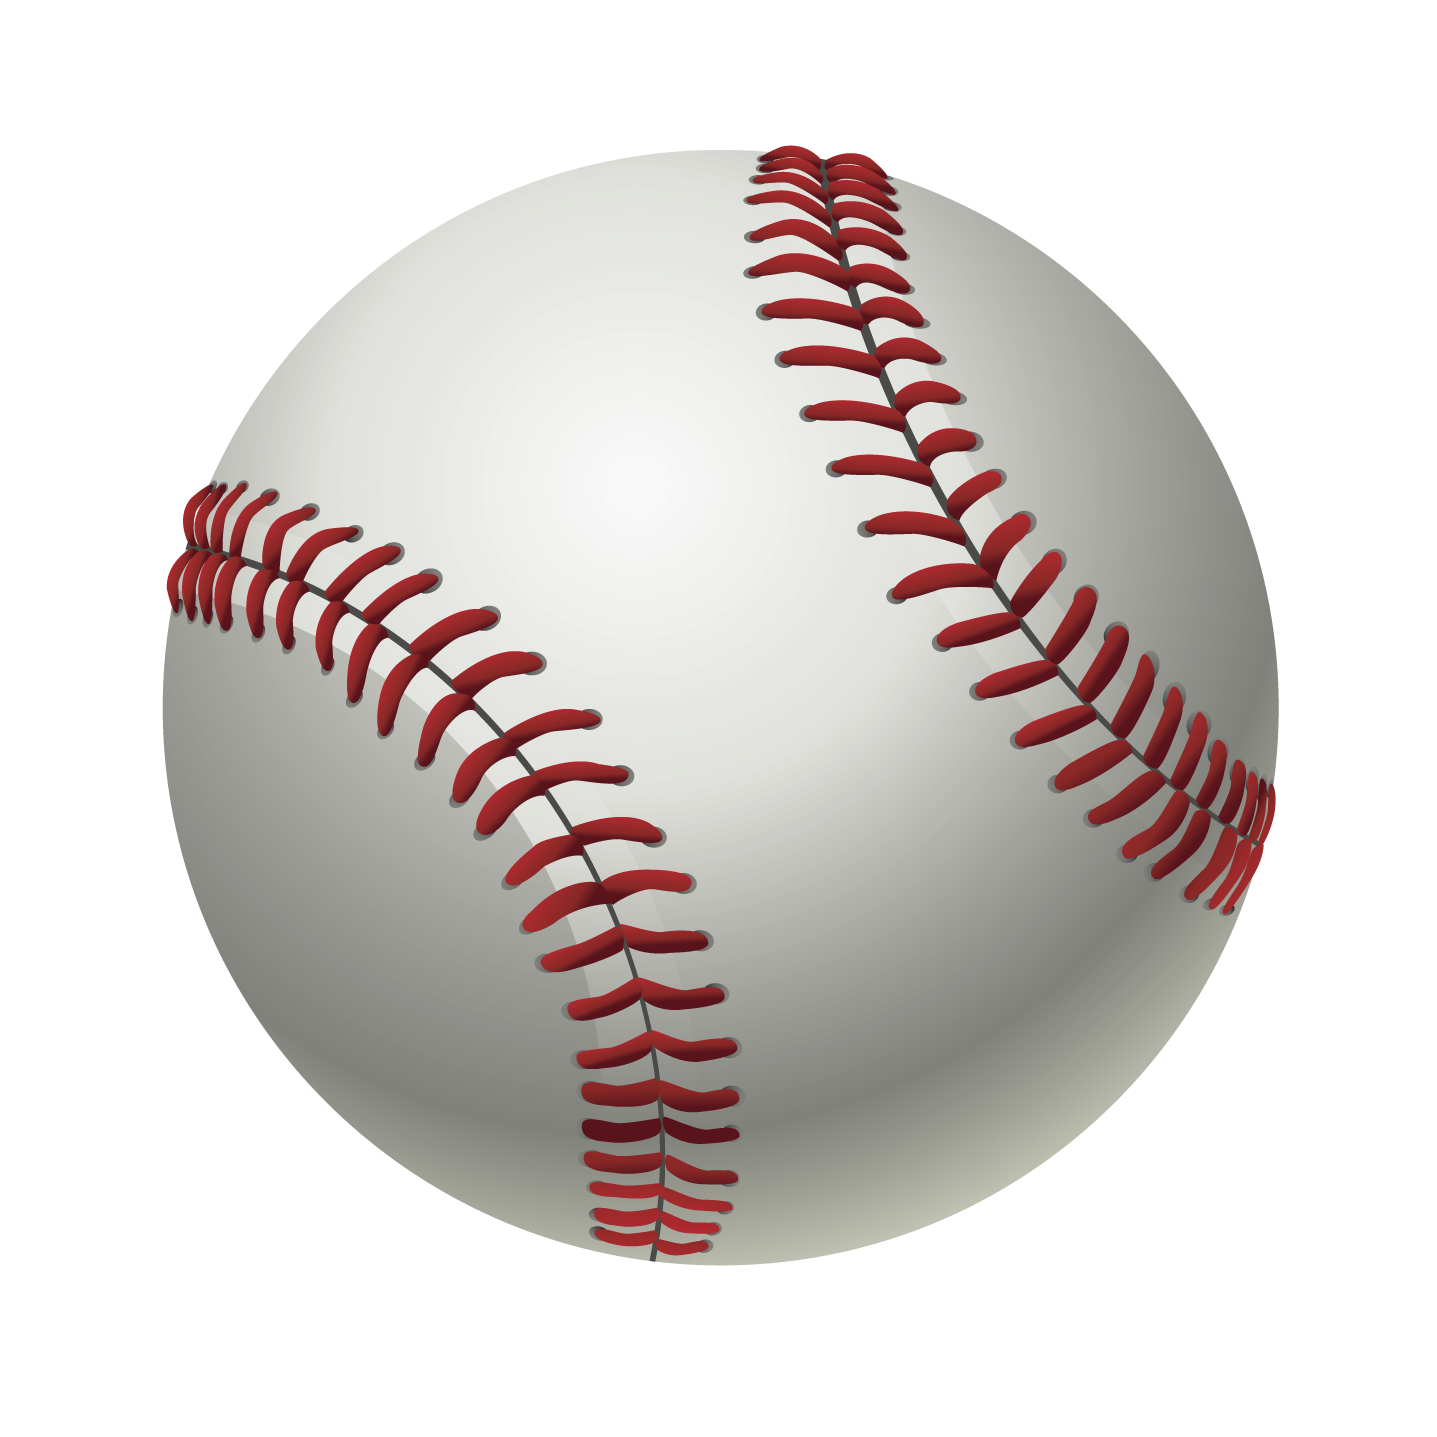 Free Download Of Baseball Icon Clipart Png Transparent Background Free Download 35335 Freeiconspng